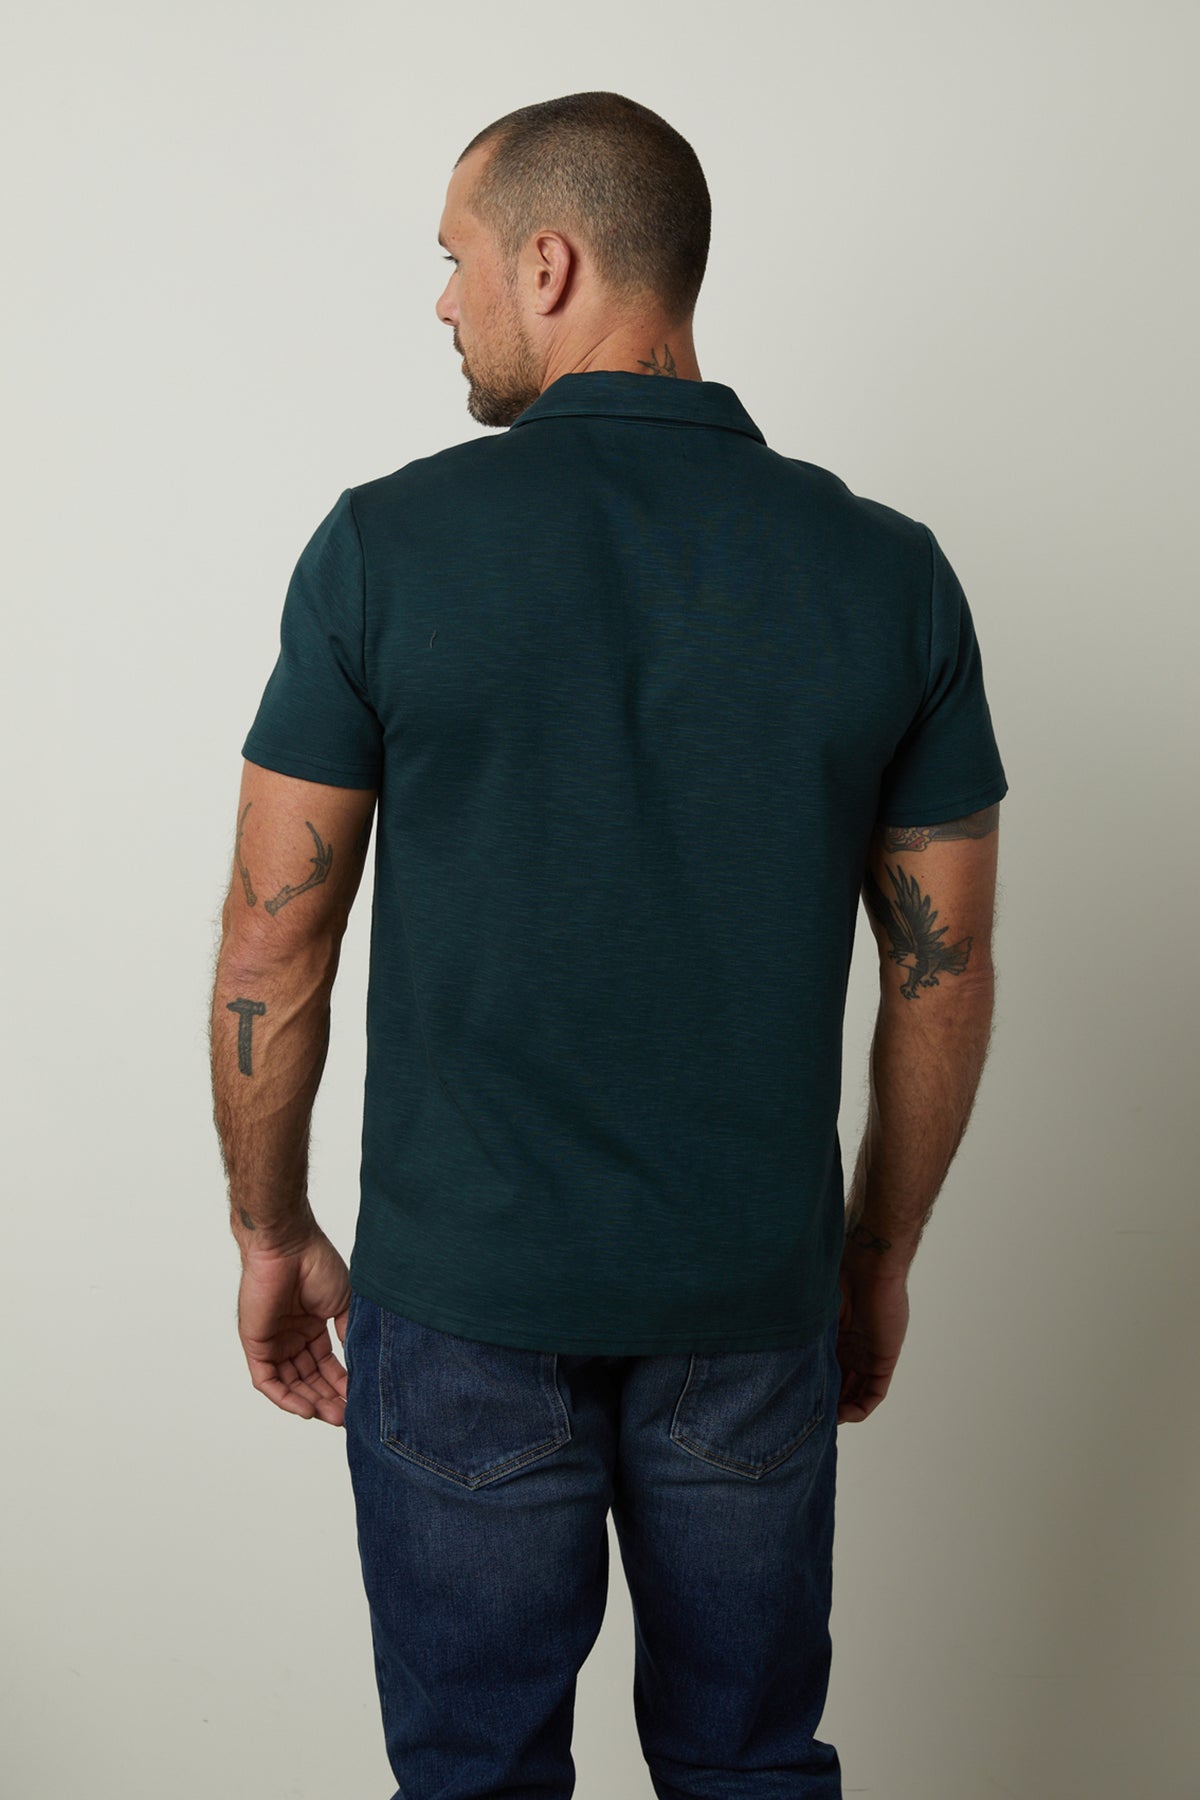 The back view of a man wearing a Velvet by Graham & Spencer DILAN COTTON BLEND POLO shirt.-26846254661825